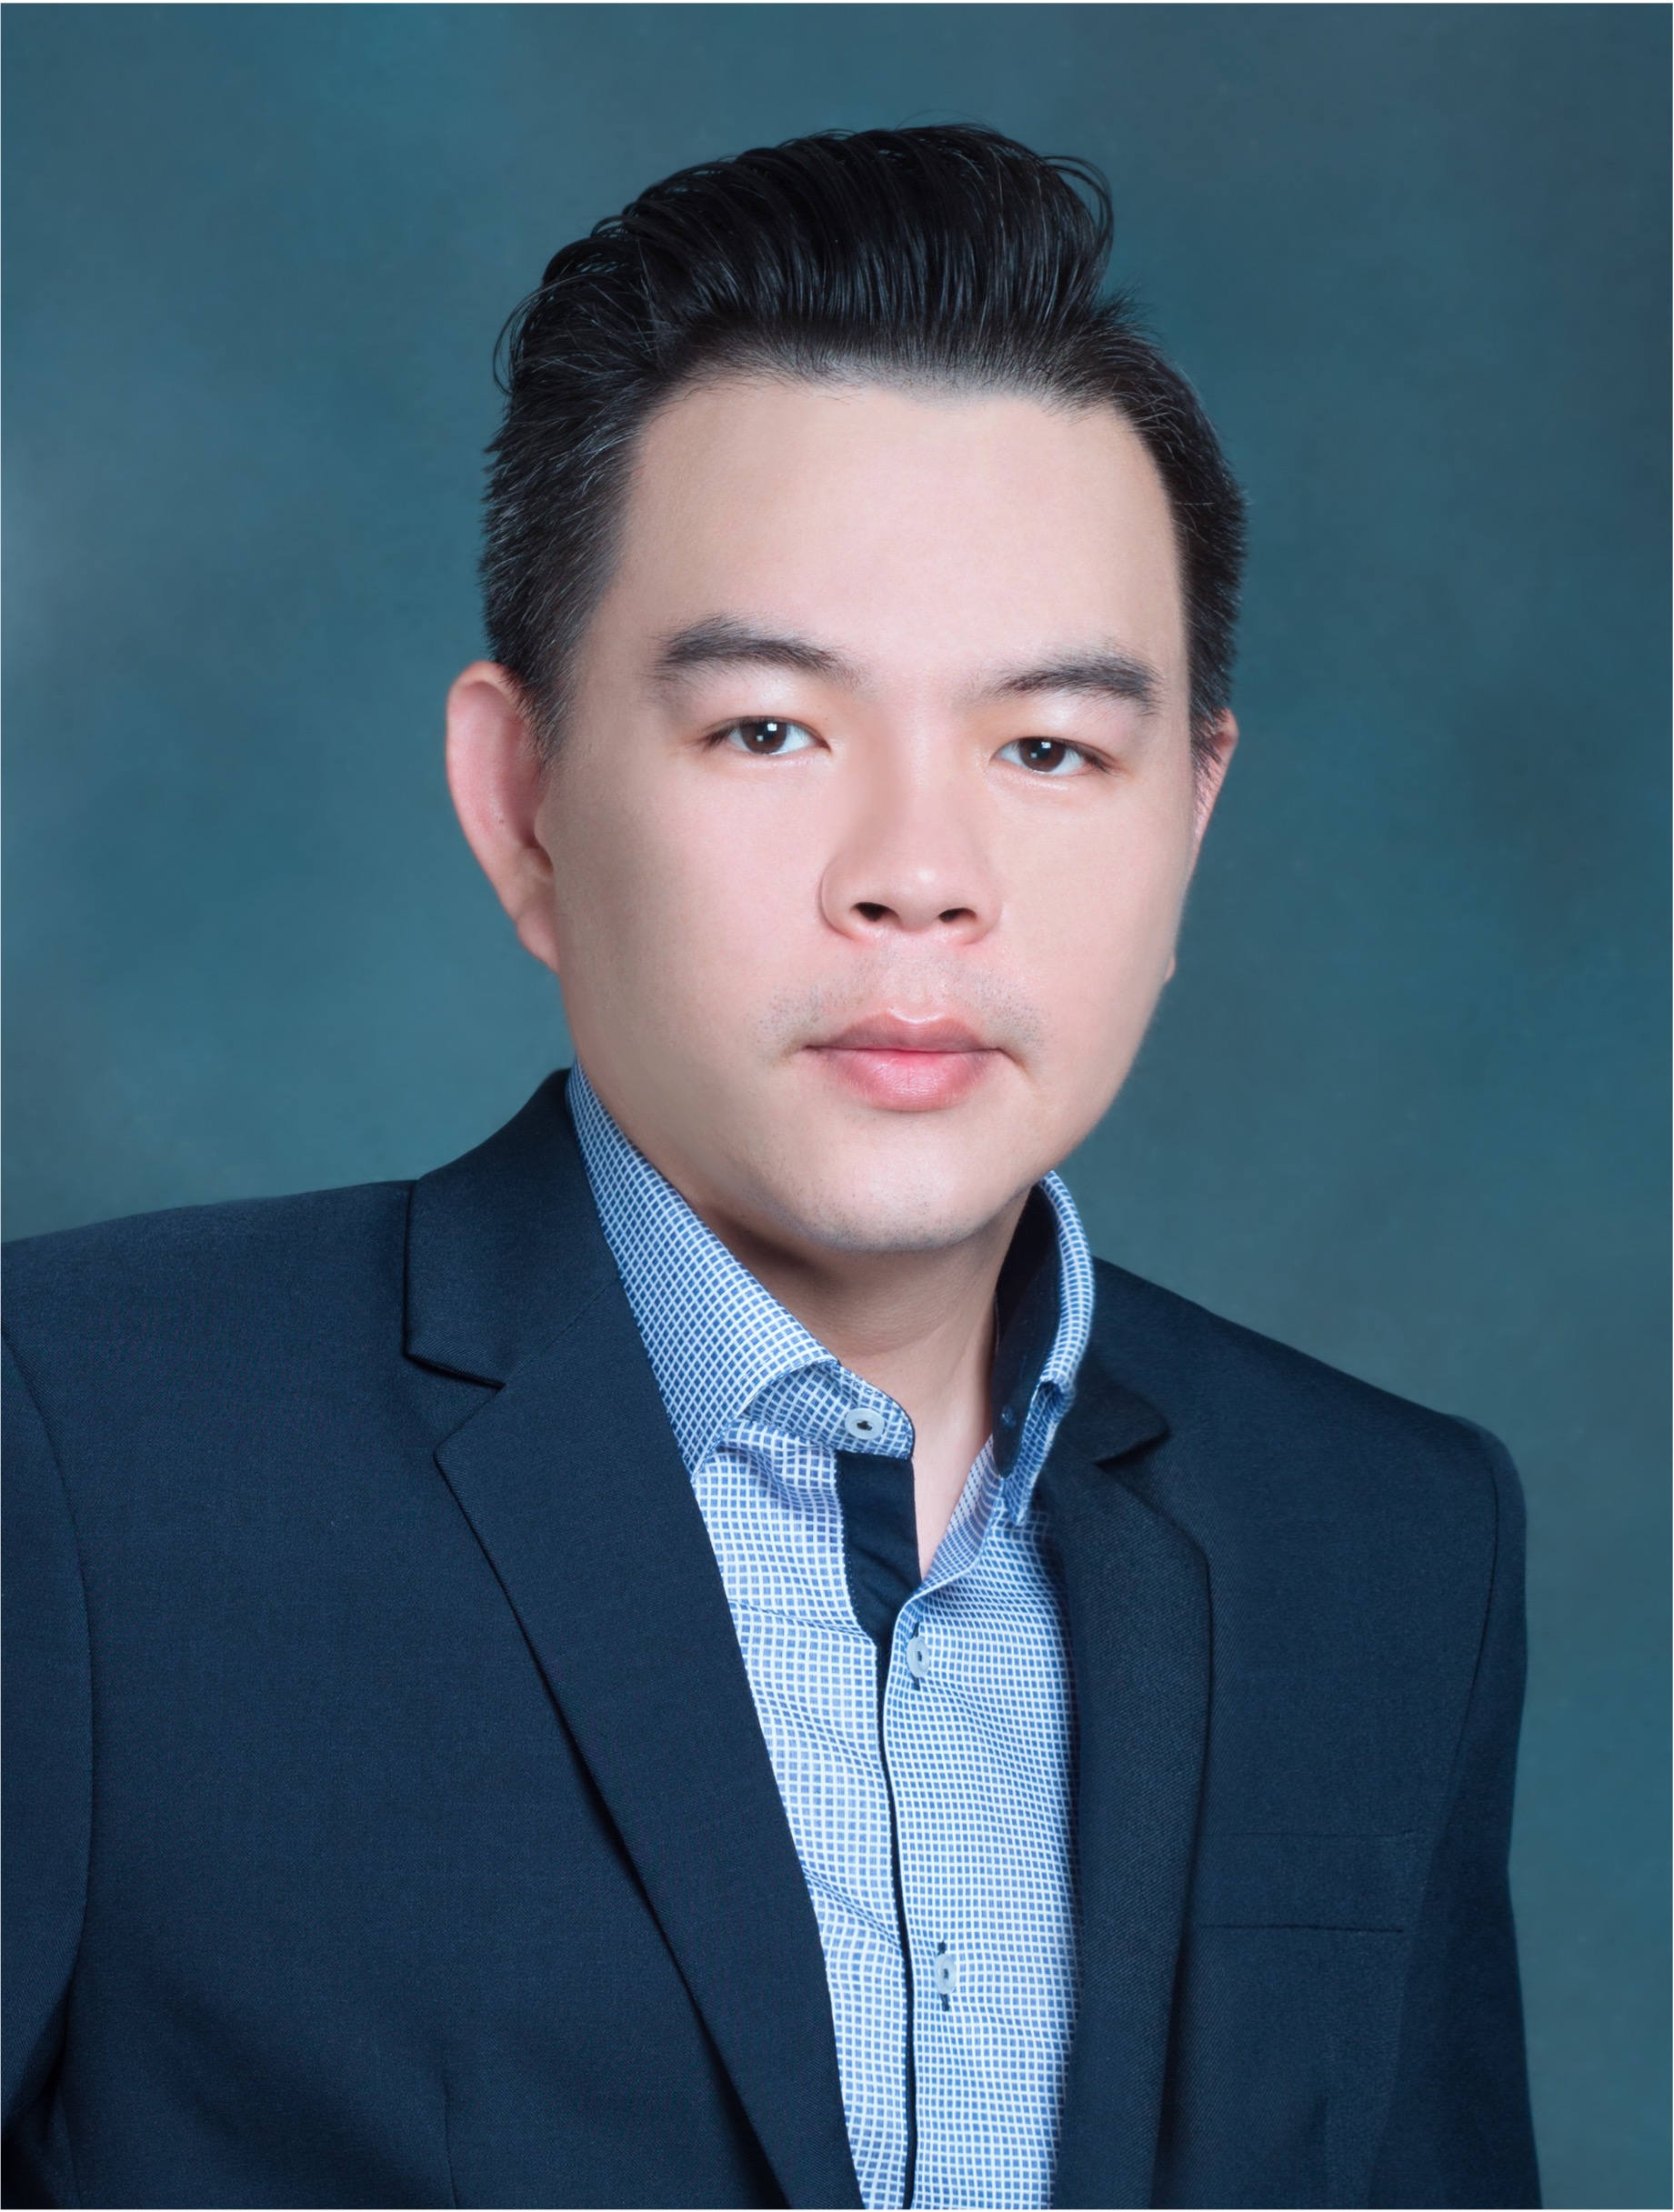 Anddrew Tan, ASEA General Manager for Malaysia and Singapore